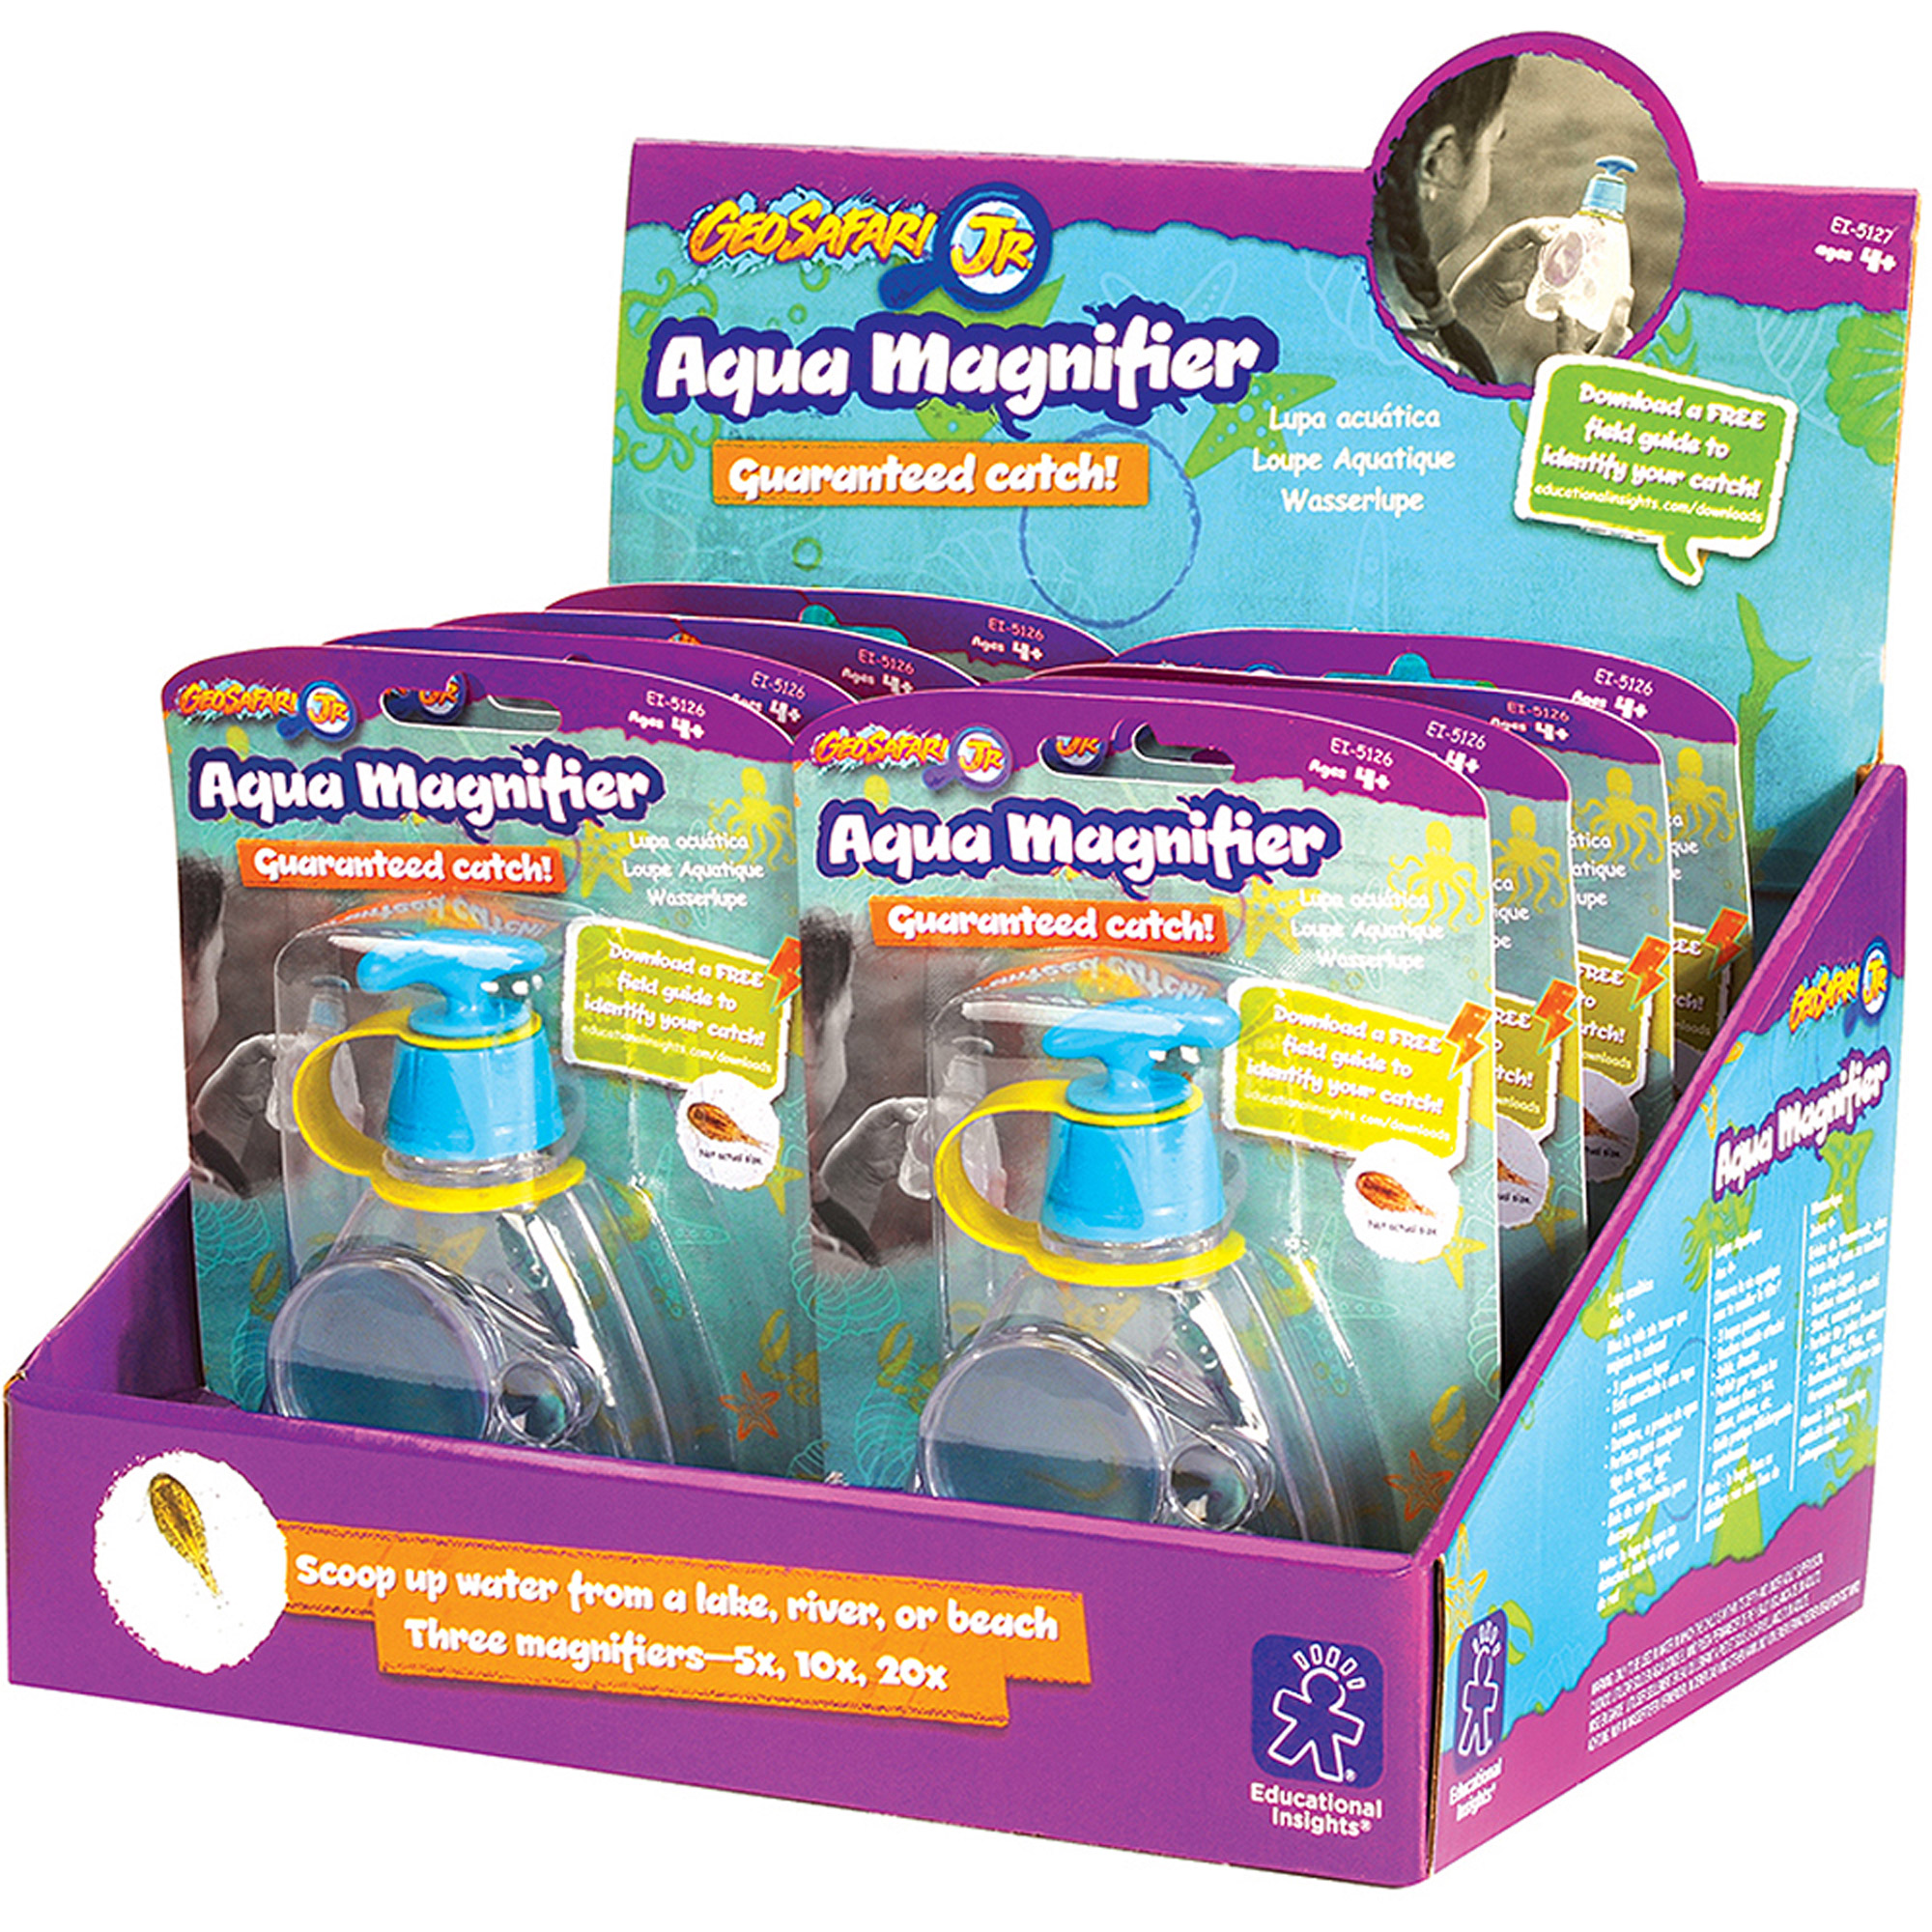 Educational Insights Aqua Magnifier, Party Pack - image 1 of 2